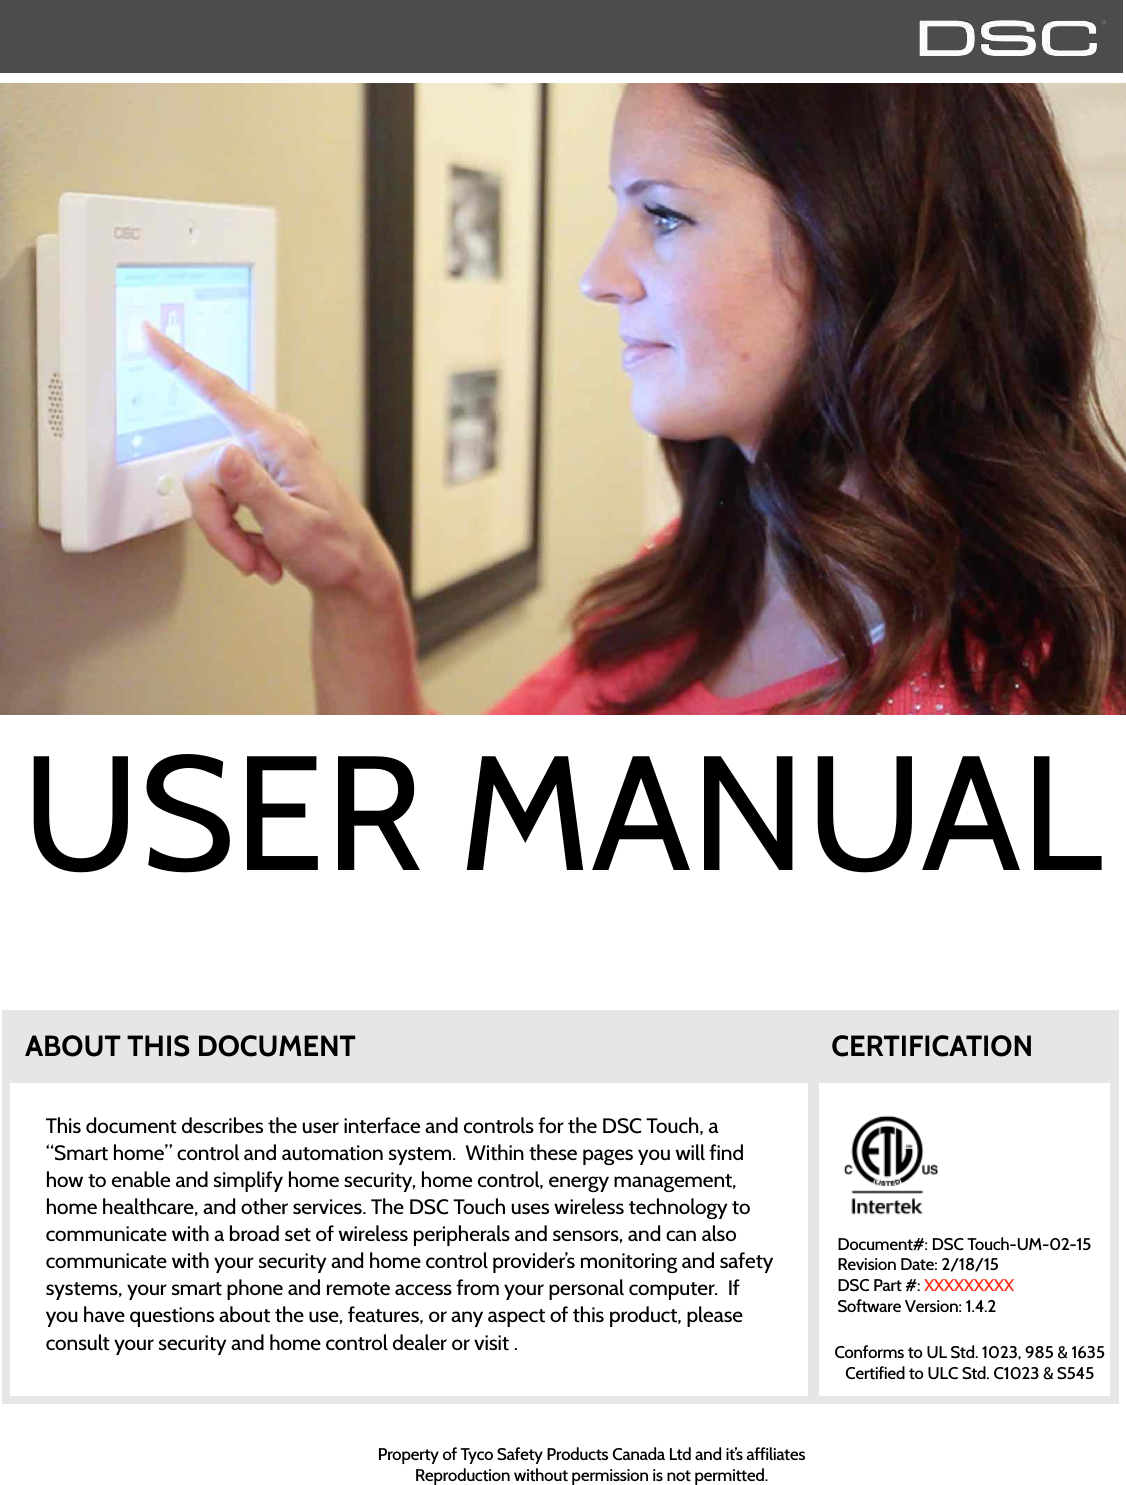 ABOUT THIS DOCUMENTThis document describes the user interface and controls for the DSC Touch, a “Smart home” control and automation system.  Within these pages you will find how to enable and simplify home security, home control, energy management, home healthcare, and other services. The DSC Touch uses wireless technology to communicate with a broad set of wireless peripherals and sensors, and can also communicate with your security and home control provider’s monitoring and safety systems, your smart phone and remote access from your personal computer.  If you have questions about the use, features, or any aspect of this product, please consult your security and home control dealer or visit .Document#: DSC Touch-UM-02-15Revision Date: 2/18/15DSC Part #: XXXXXXXXXSoftware Version: 1.4.2Property of Tyco Safety Products Canada Ltd and it’s affiliatesReproduction without permission is not permitted.CERTIFICATIONConforms to UL Std. 1023, 985 &amp; 1635Certified to ULC Std. C1023 &amp; S545USER MANUAL